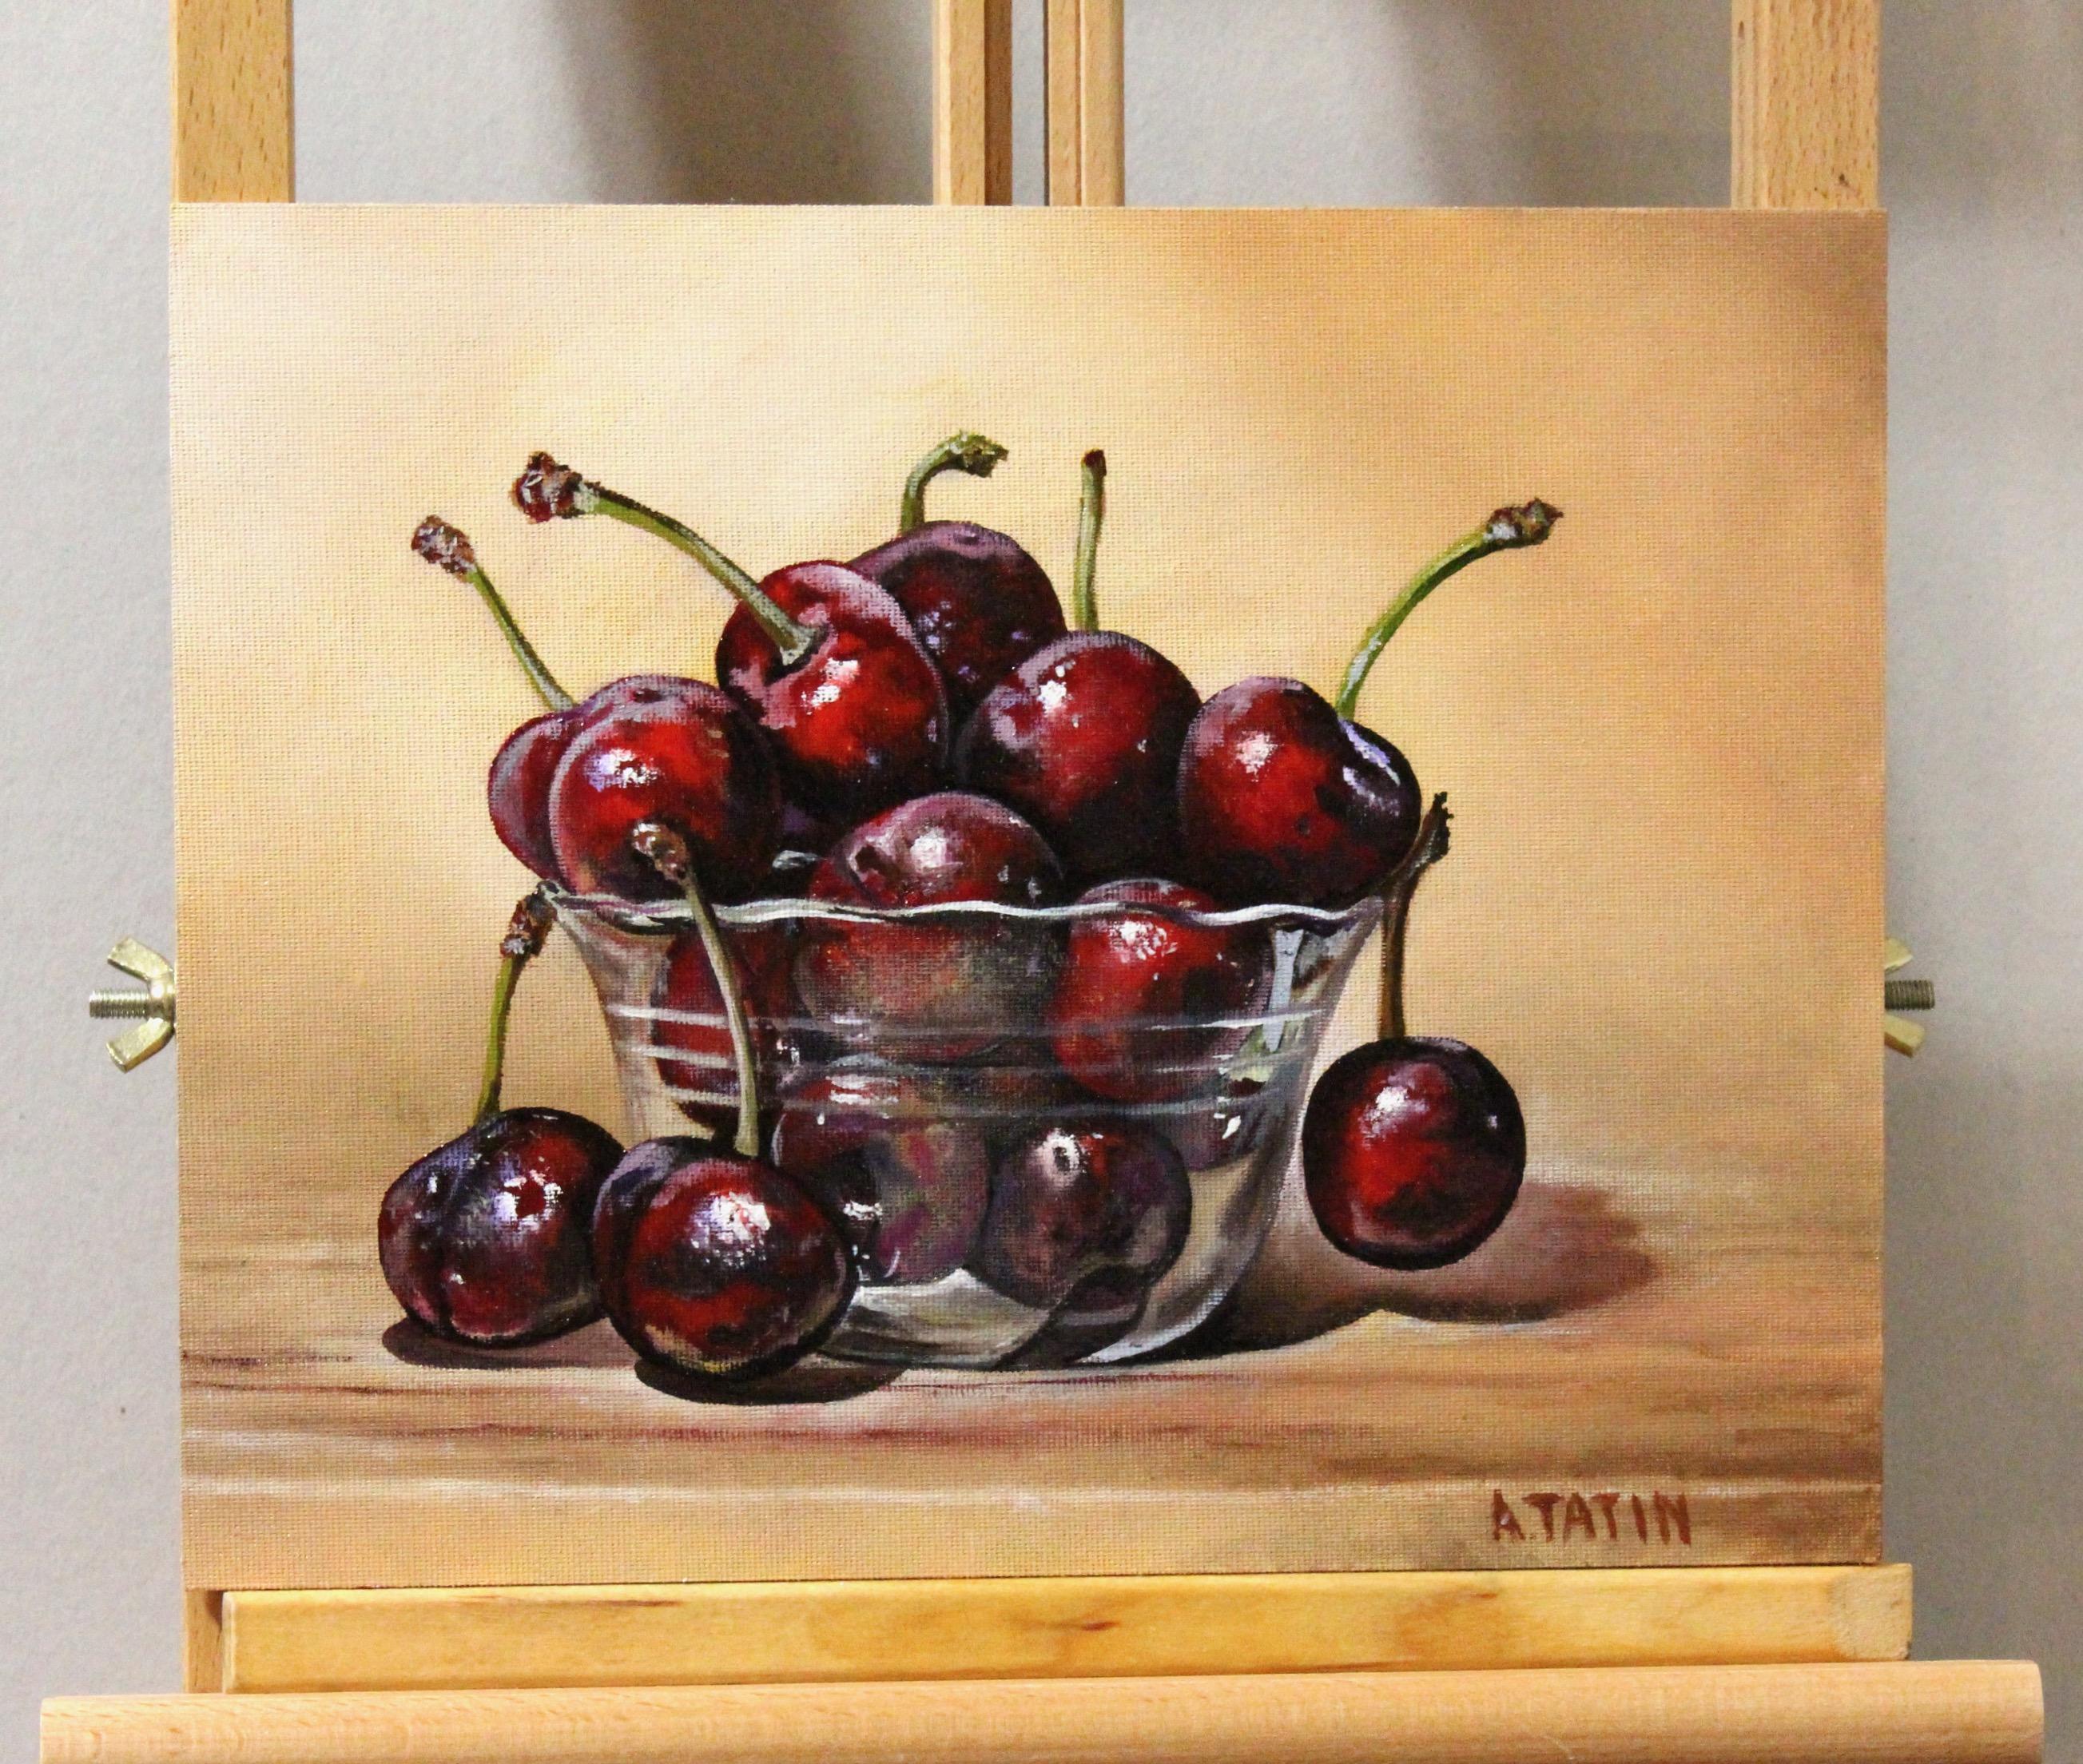 <p>Artist Comments<br />Red, juicy cherries rest in a glass bowl, showcasing their plumpness and vibrant summer hues. The light illuminates their glossy skin, while shadows add depth and dimension to their form. Utilizing Flemish techniques, artist